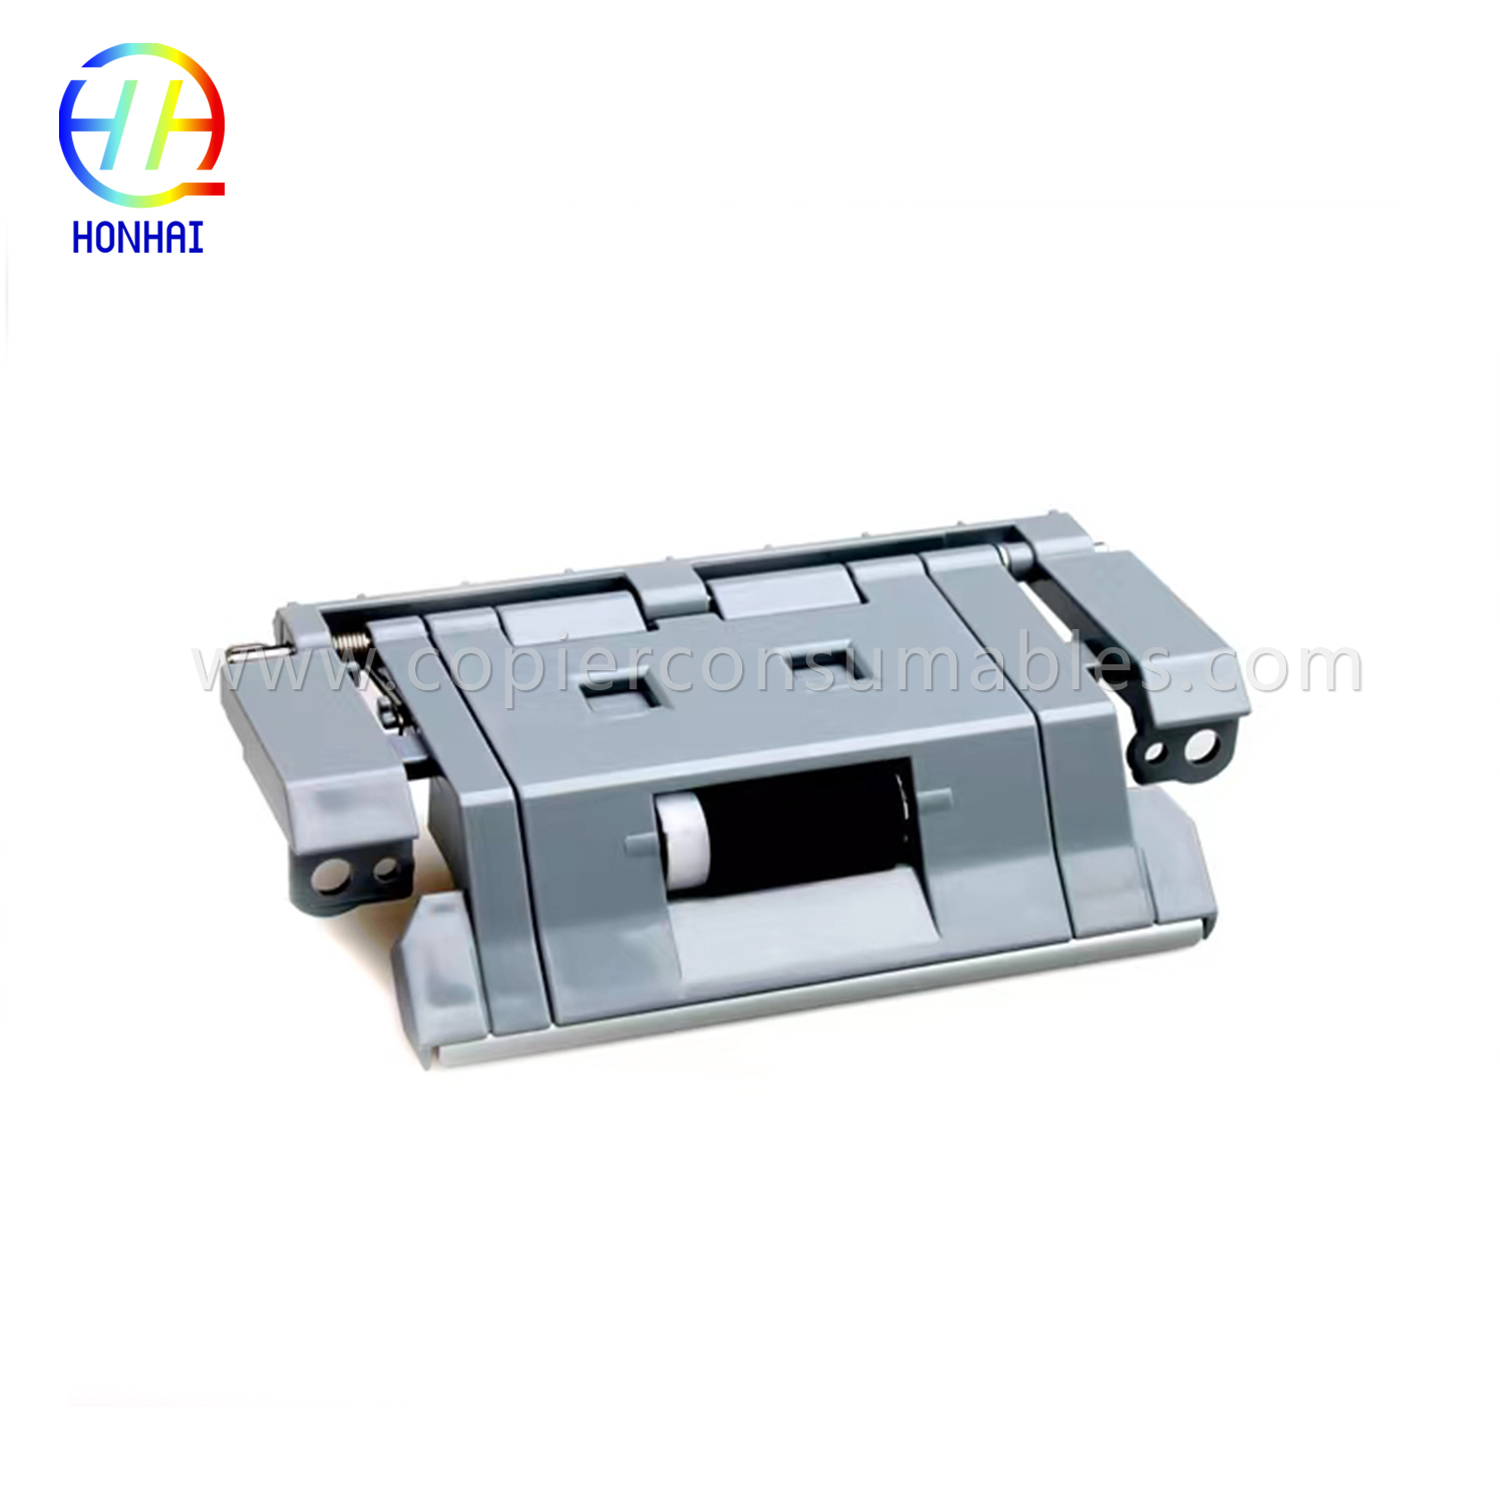 Tray 2 3 Separation Roller Assembly for HP Color Laserjet CP3525dn CP3525n CP3525X (RM1-4966-000)